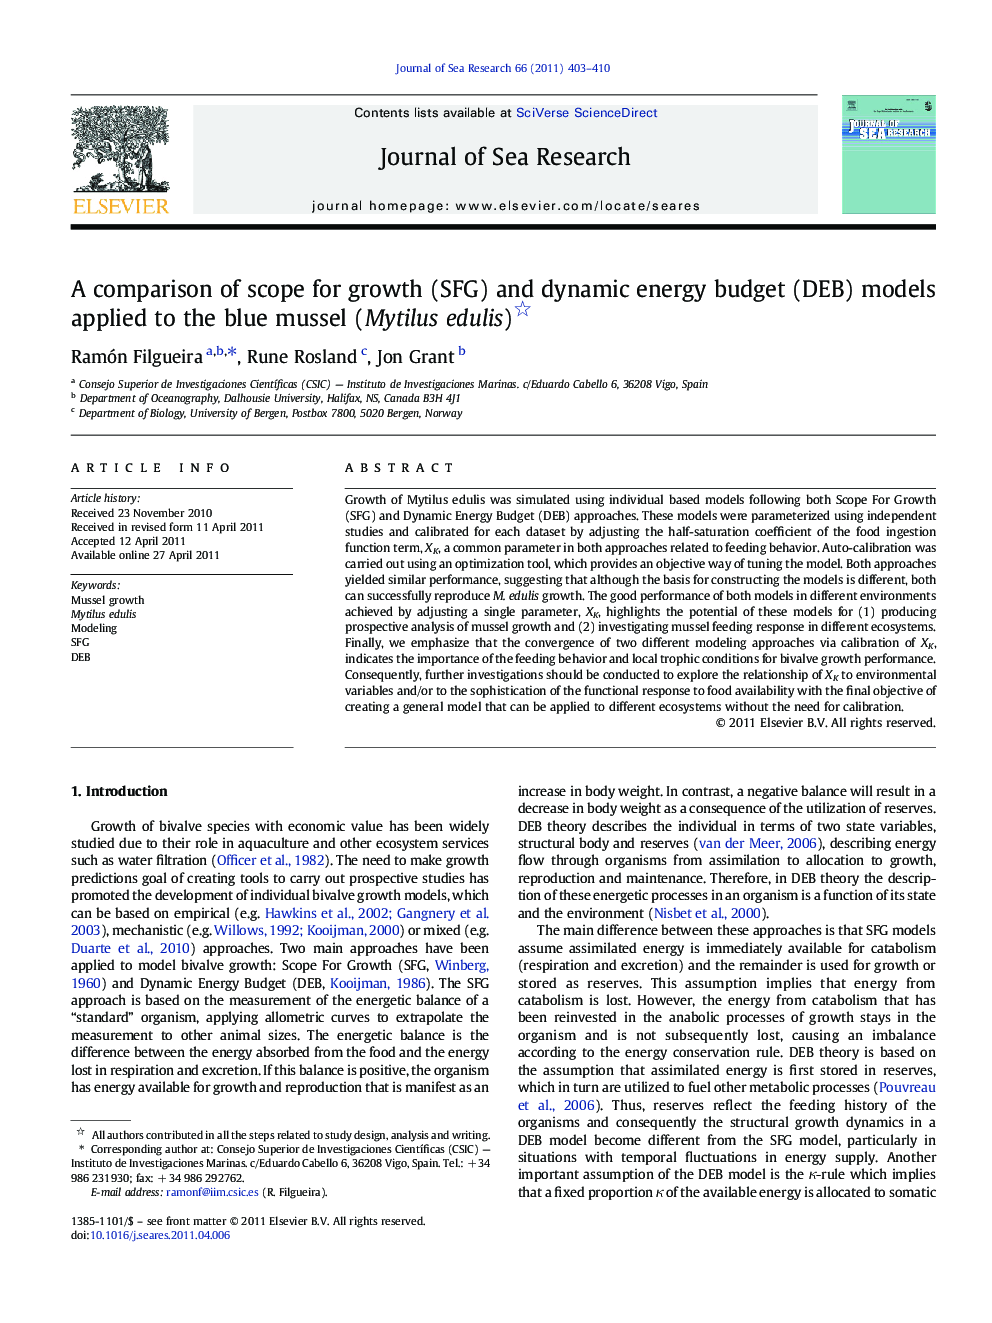 A comparison of scope for growth (SFG) and dynamic energy budget (DEB) models applied to the blue mussel (Mytilus edulis) 